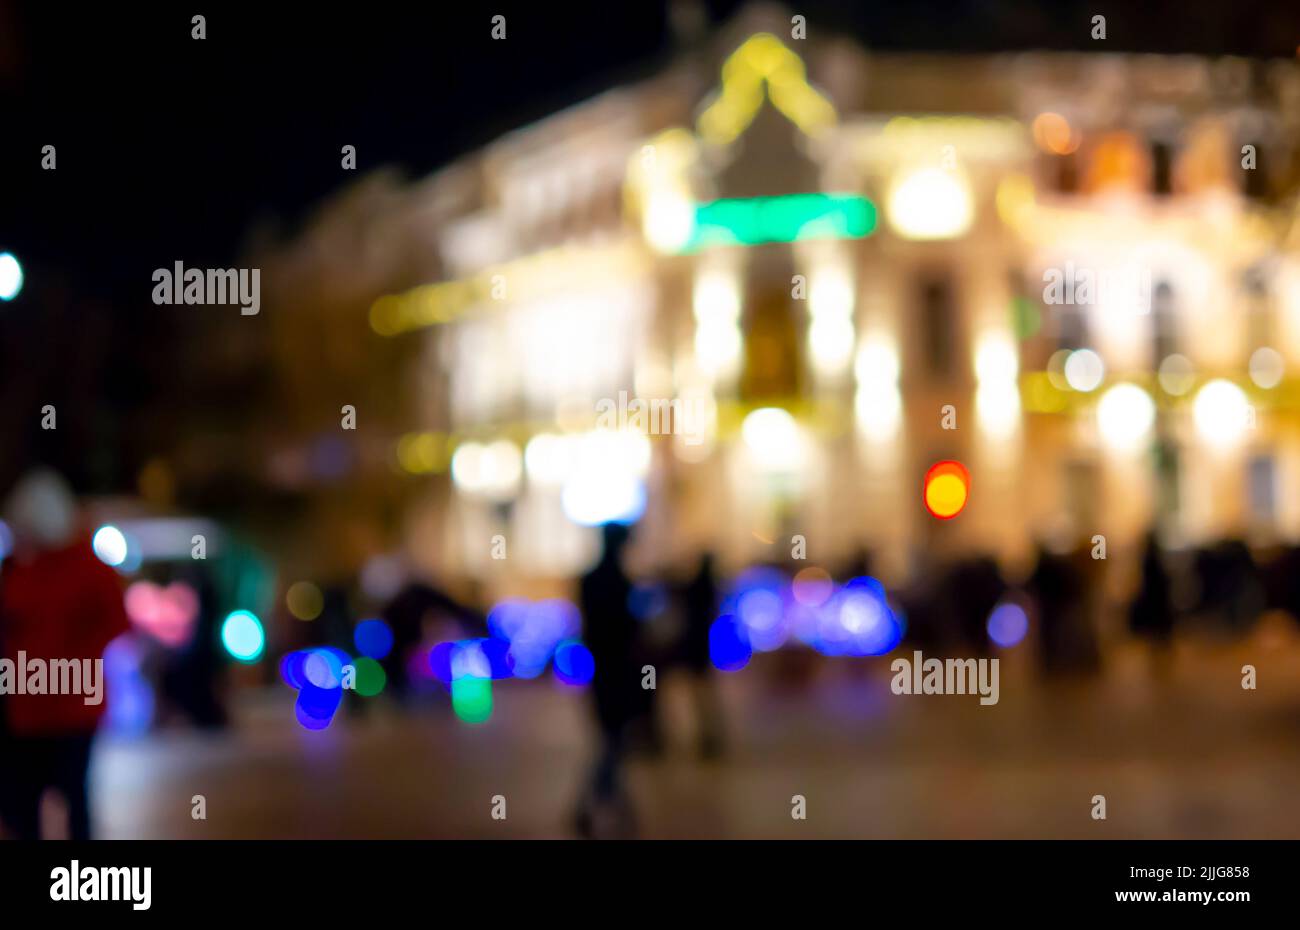 Blurred background. Blurred black silhouettes of people, blurred silhouette of architectural building illuminated by lanterns, backlight at night. City square in evening. Lots of people on city street Stock Photo